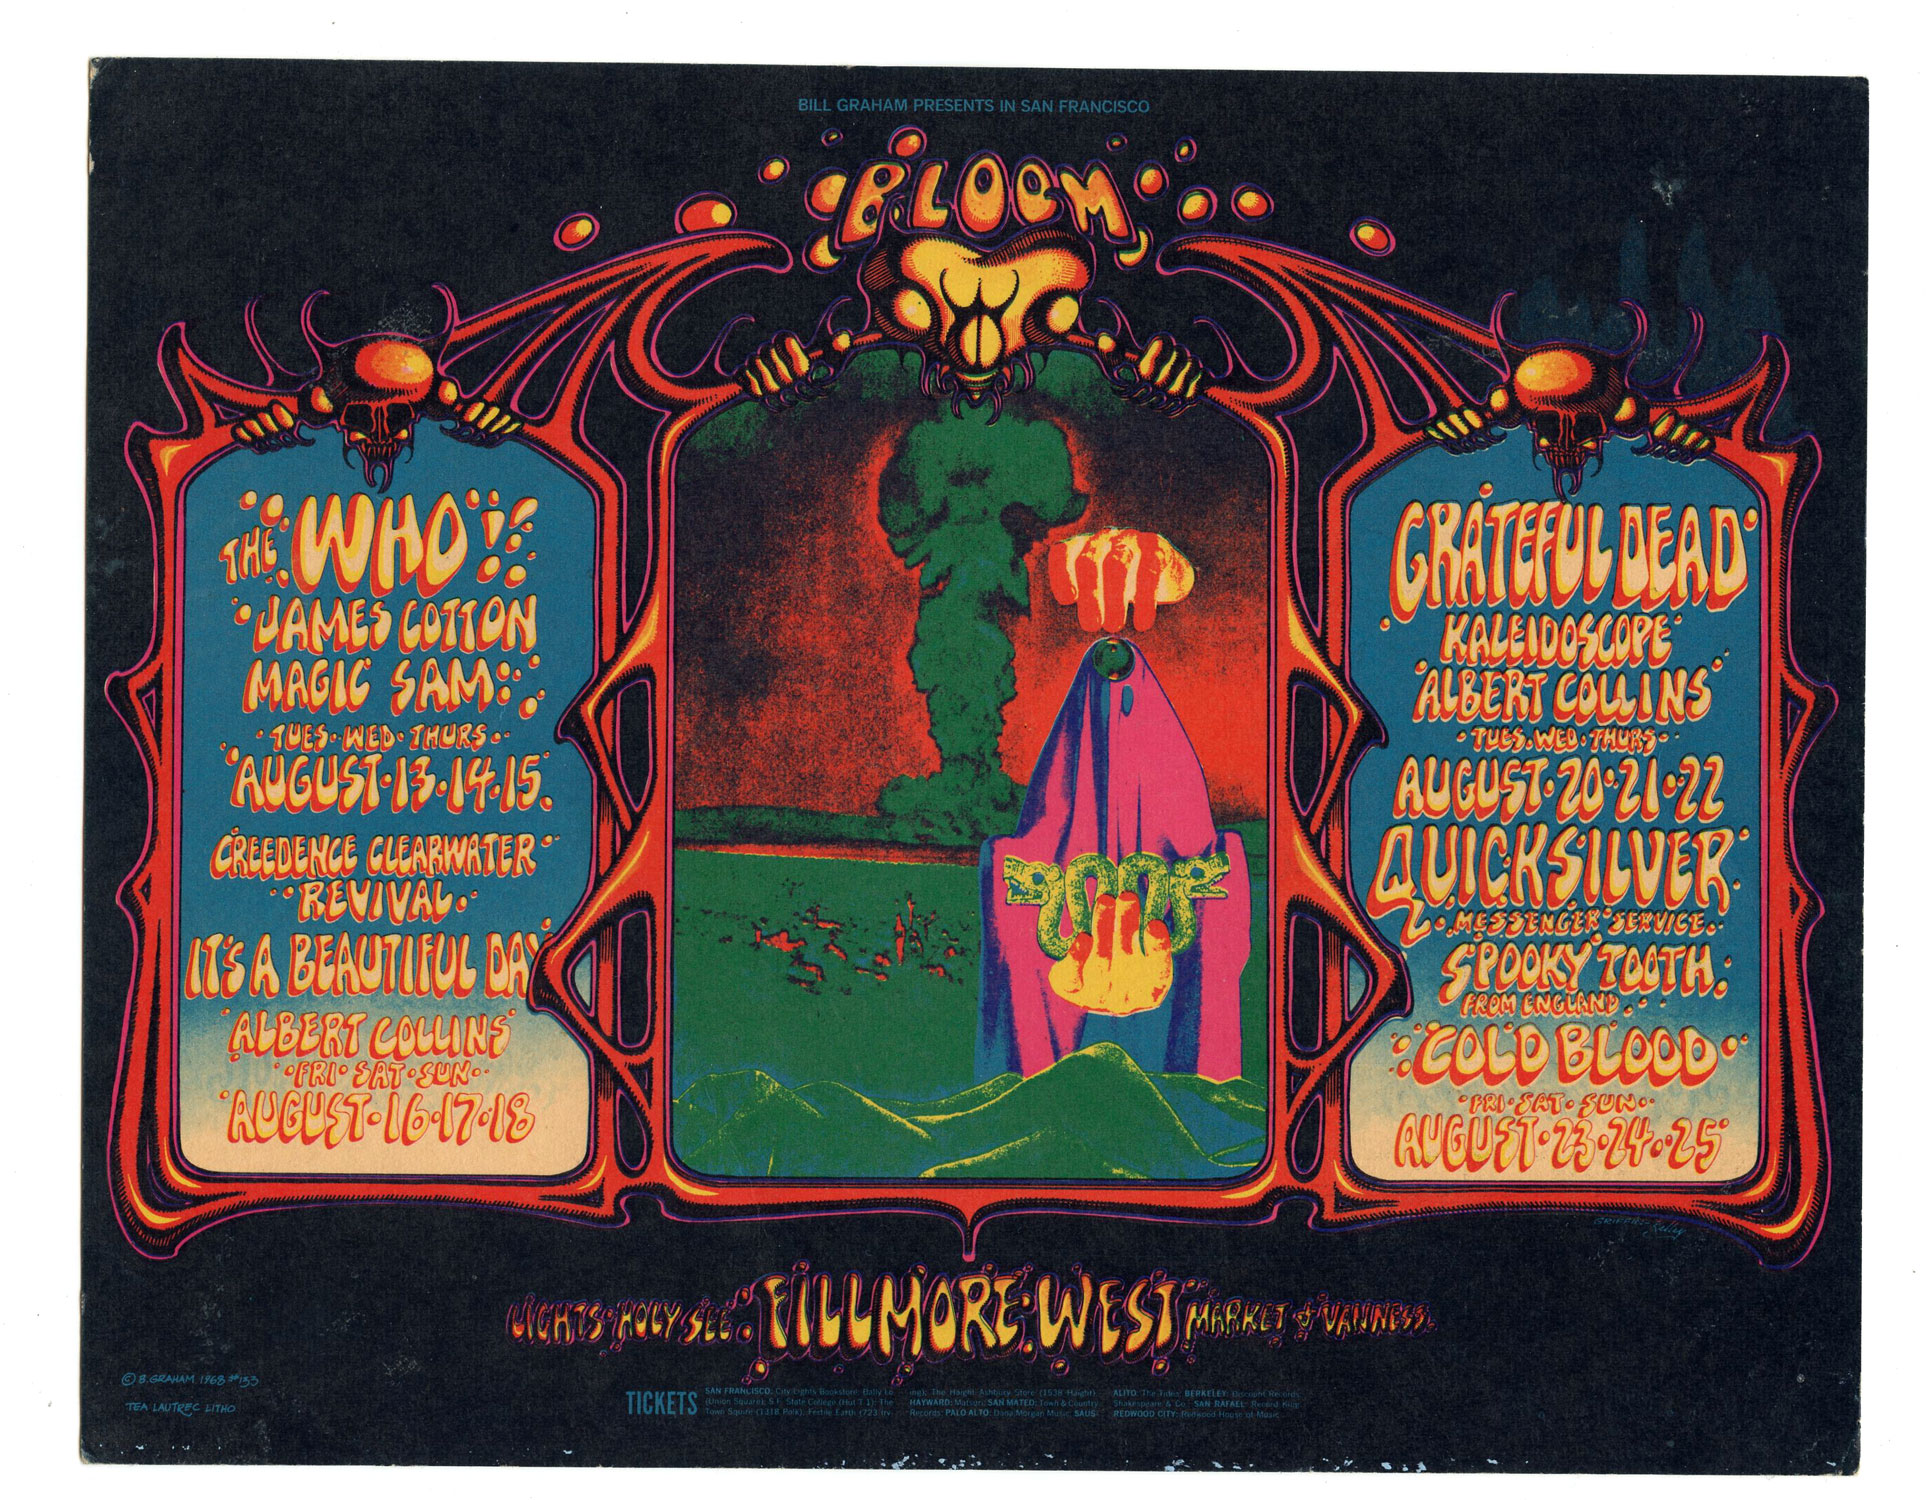 BG 133 Postcard Mailed Grateful Dead Creedence Clearwater Revival 1968 Aug 13